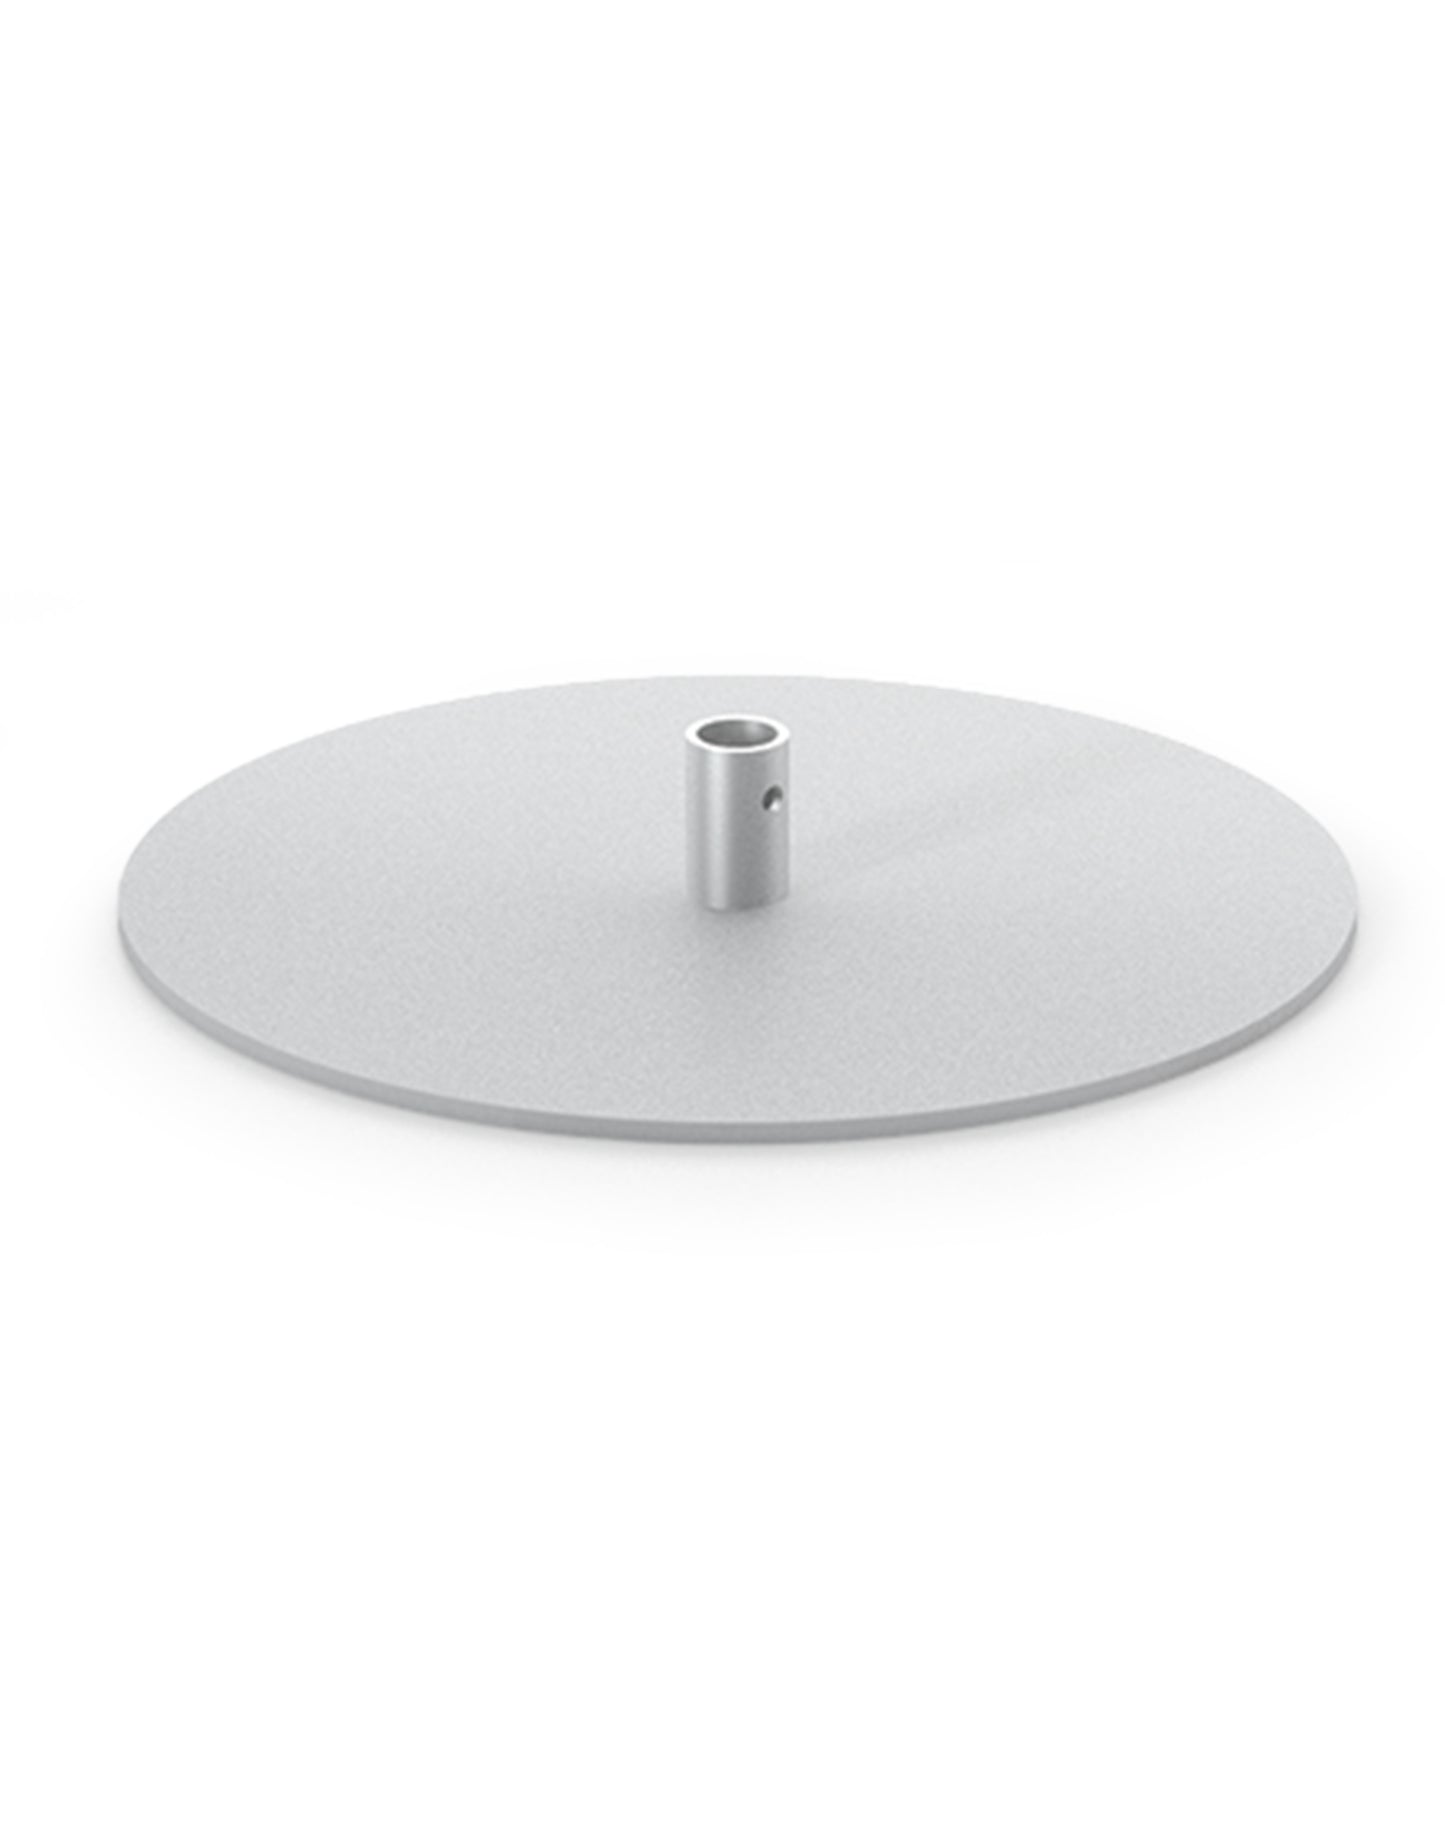 15" Round Steel Base 9 lbs, 3/16" Thick, Flat